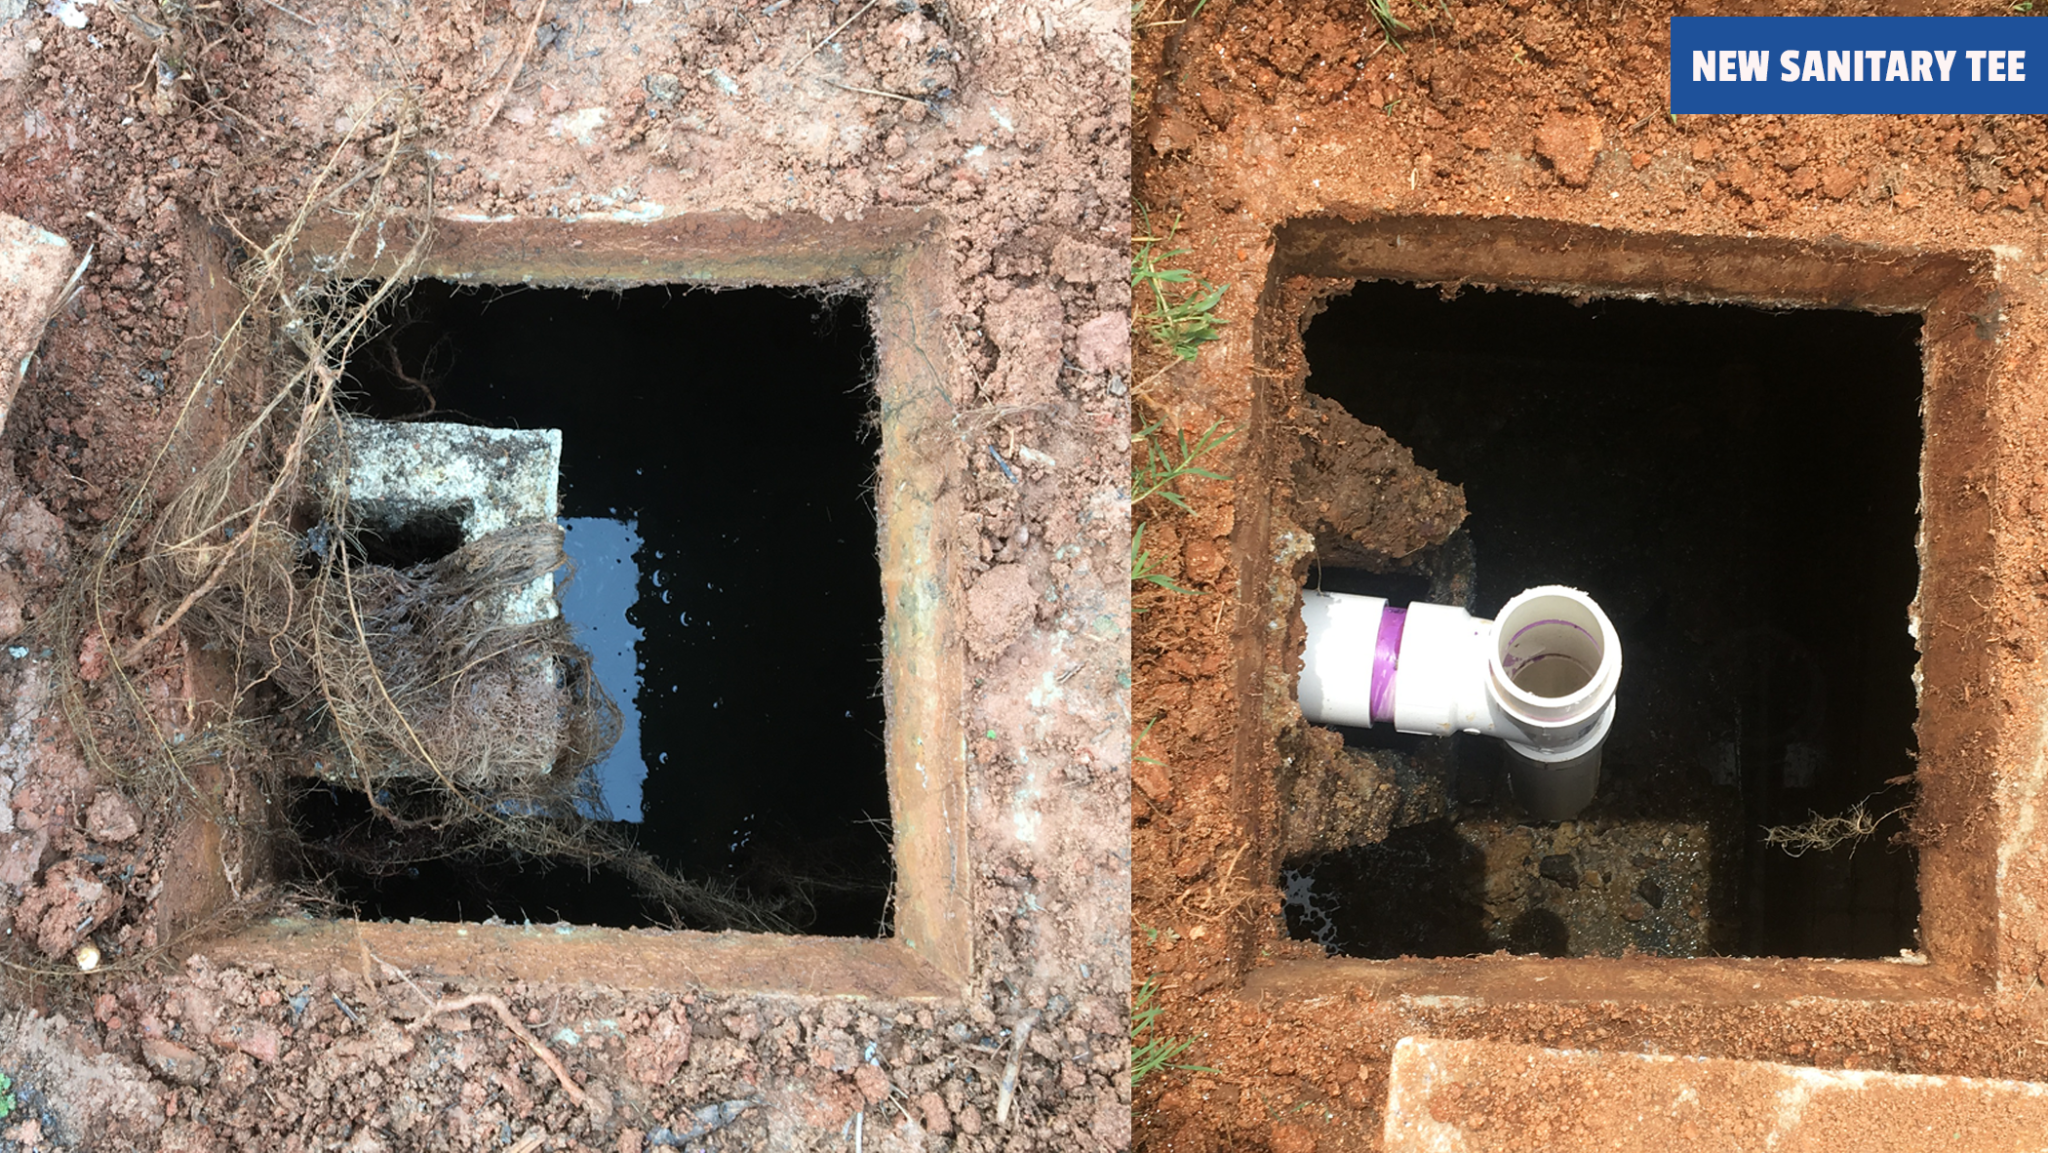 TW Ammons Septic - Installing a new sanitary tee